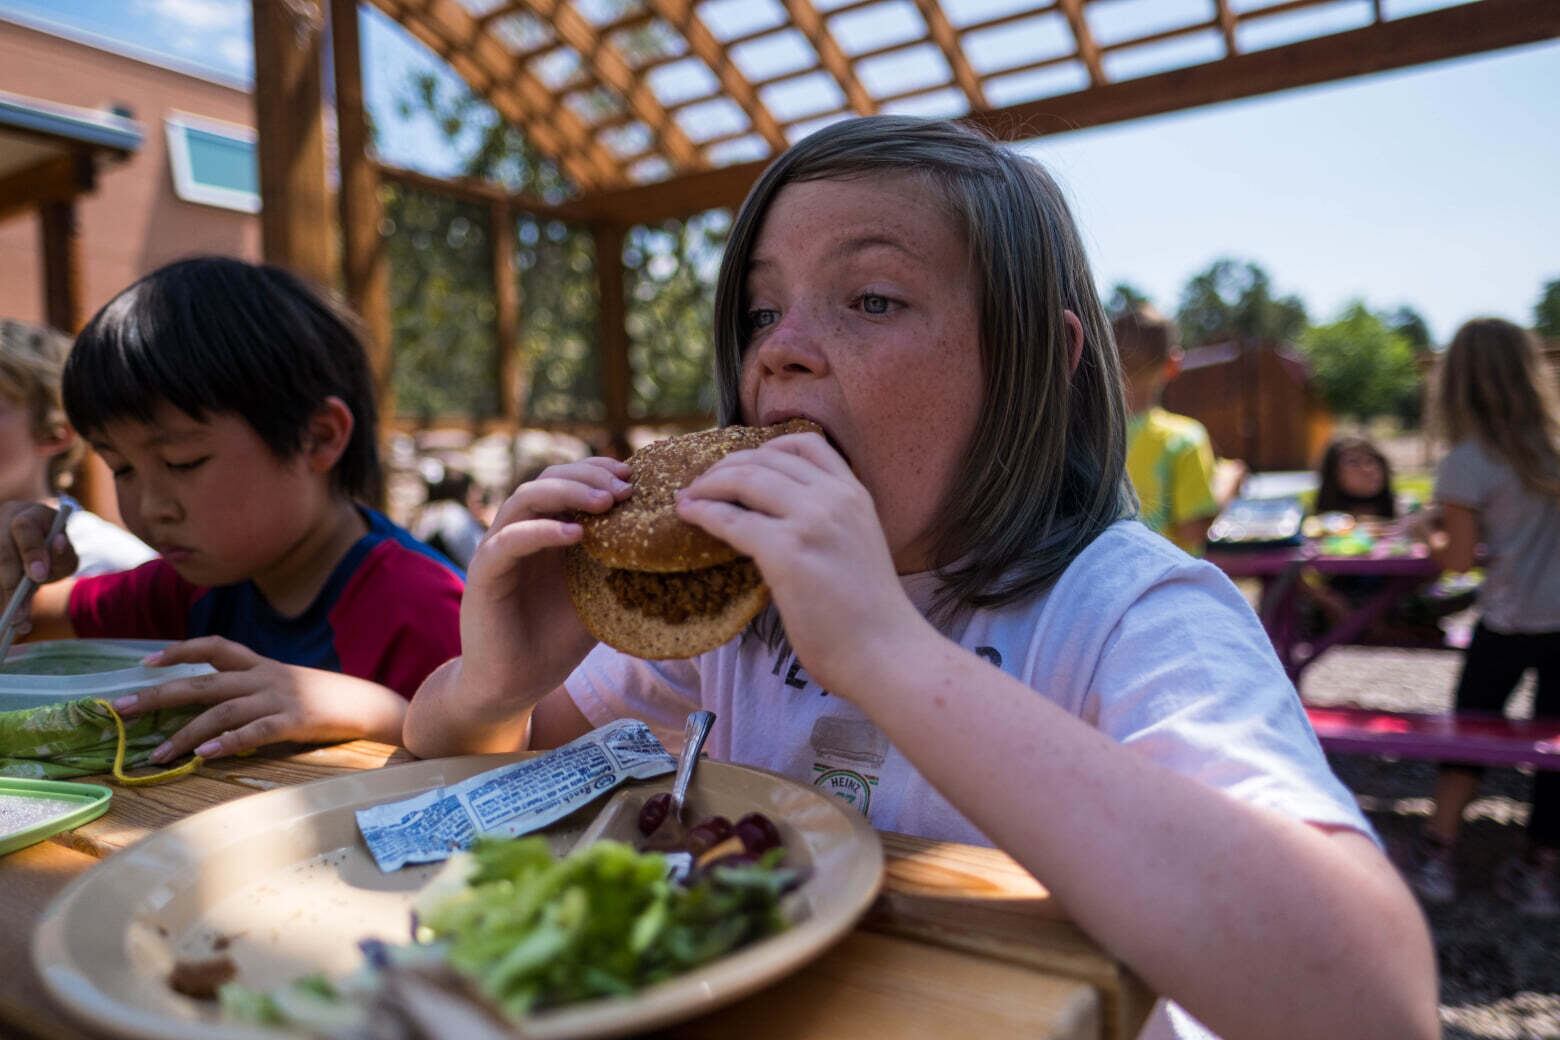 A student at Crestone Charter School eats a hamburger at an outdoor lunch table, as other students sit around them.